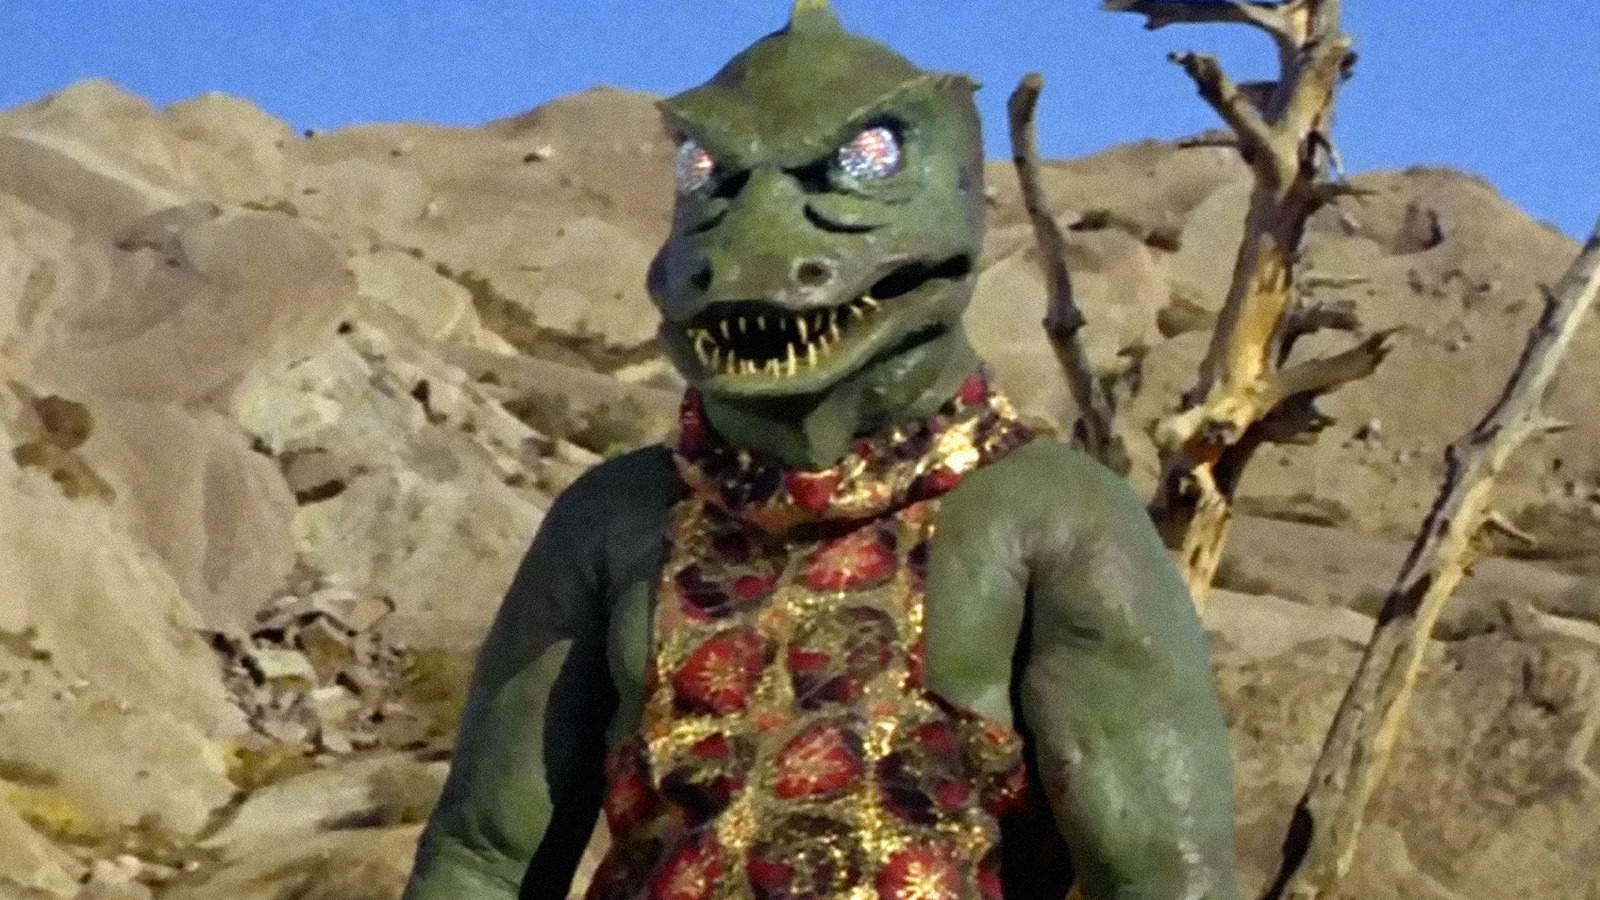 Gorn from Arena